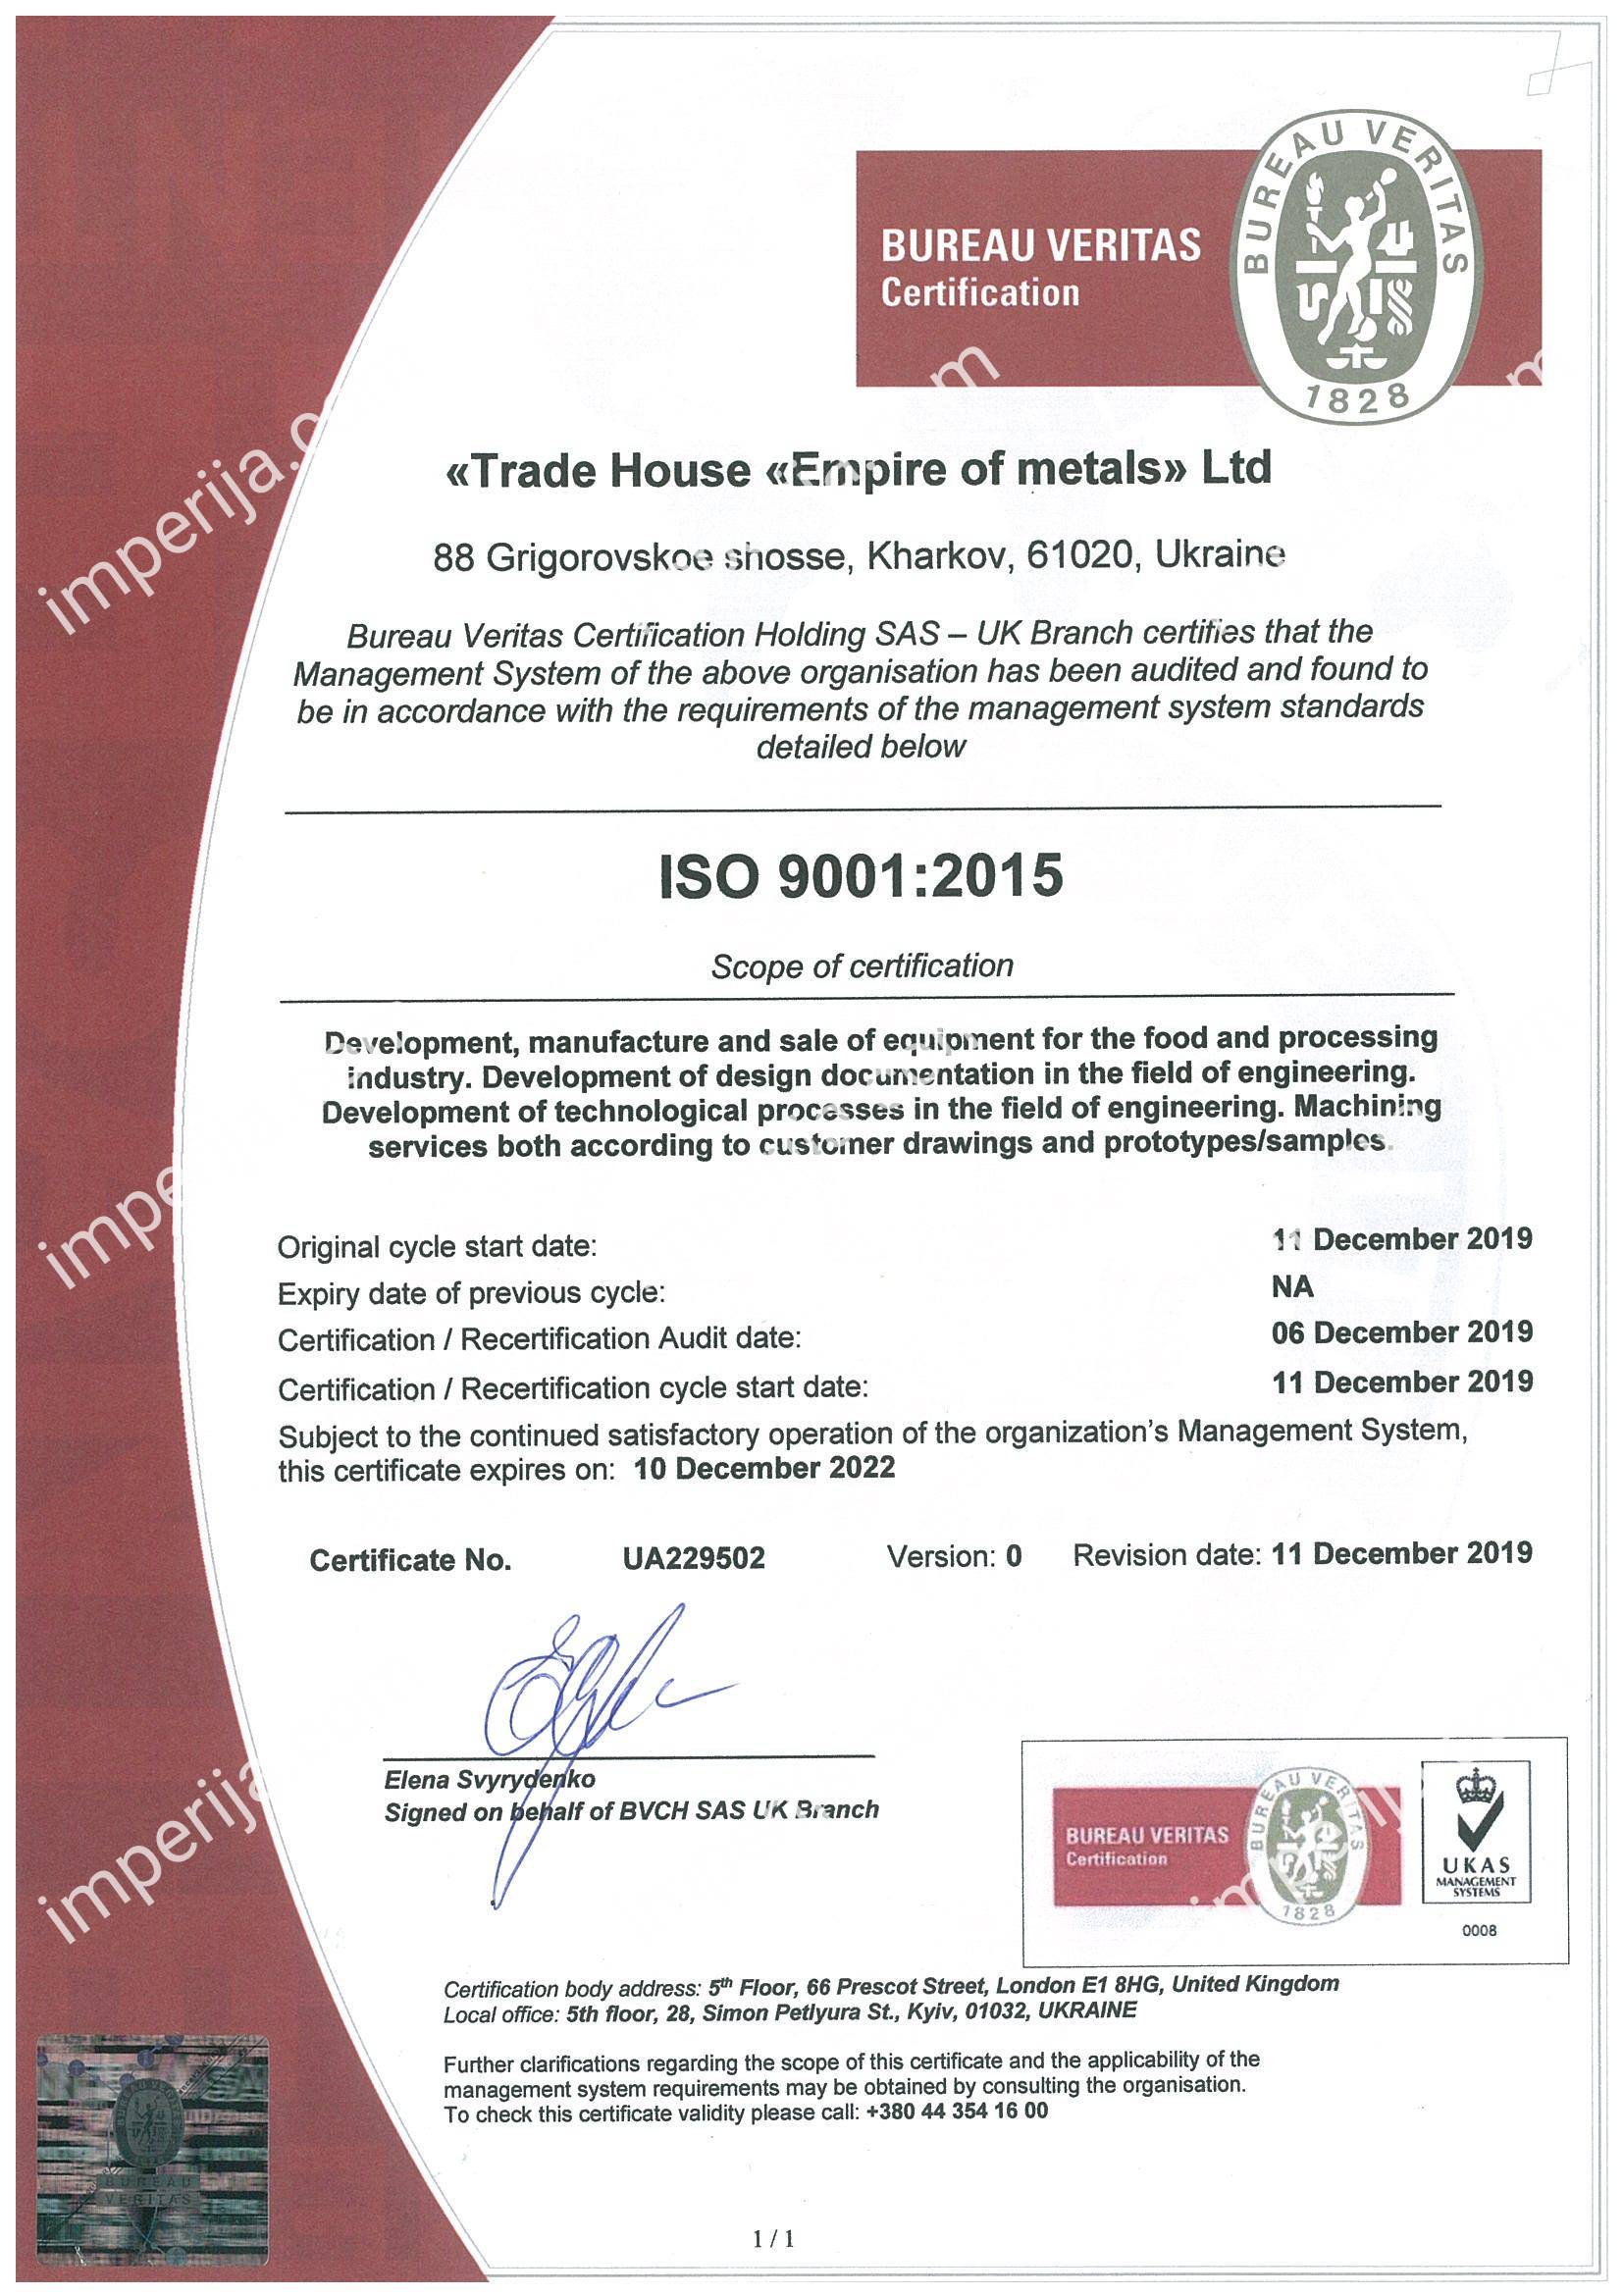 514.jpg - Certificate of Conformity obtained ISO 9001:2015